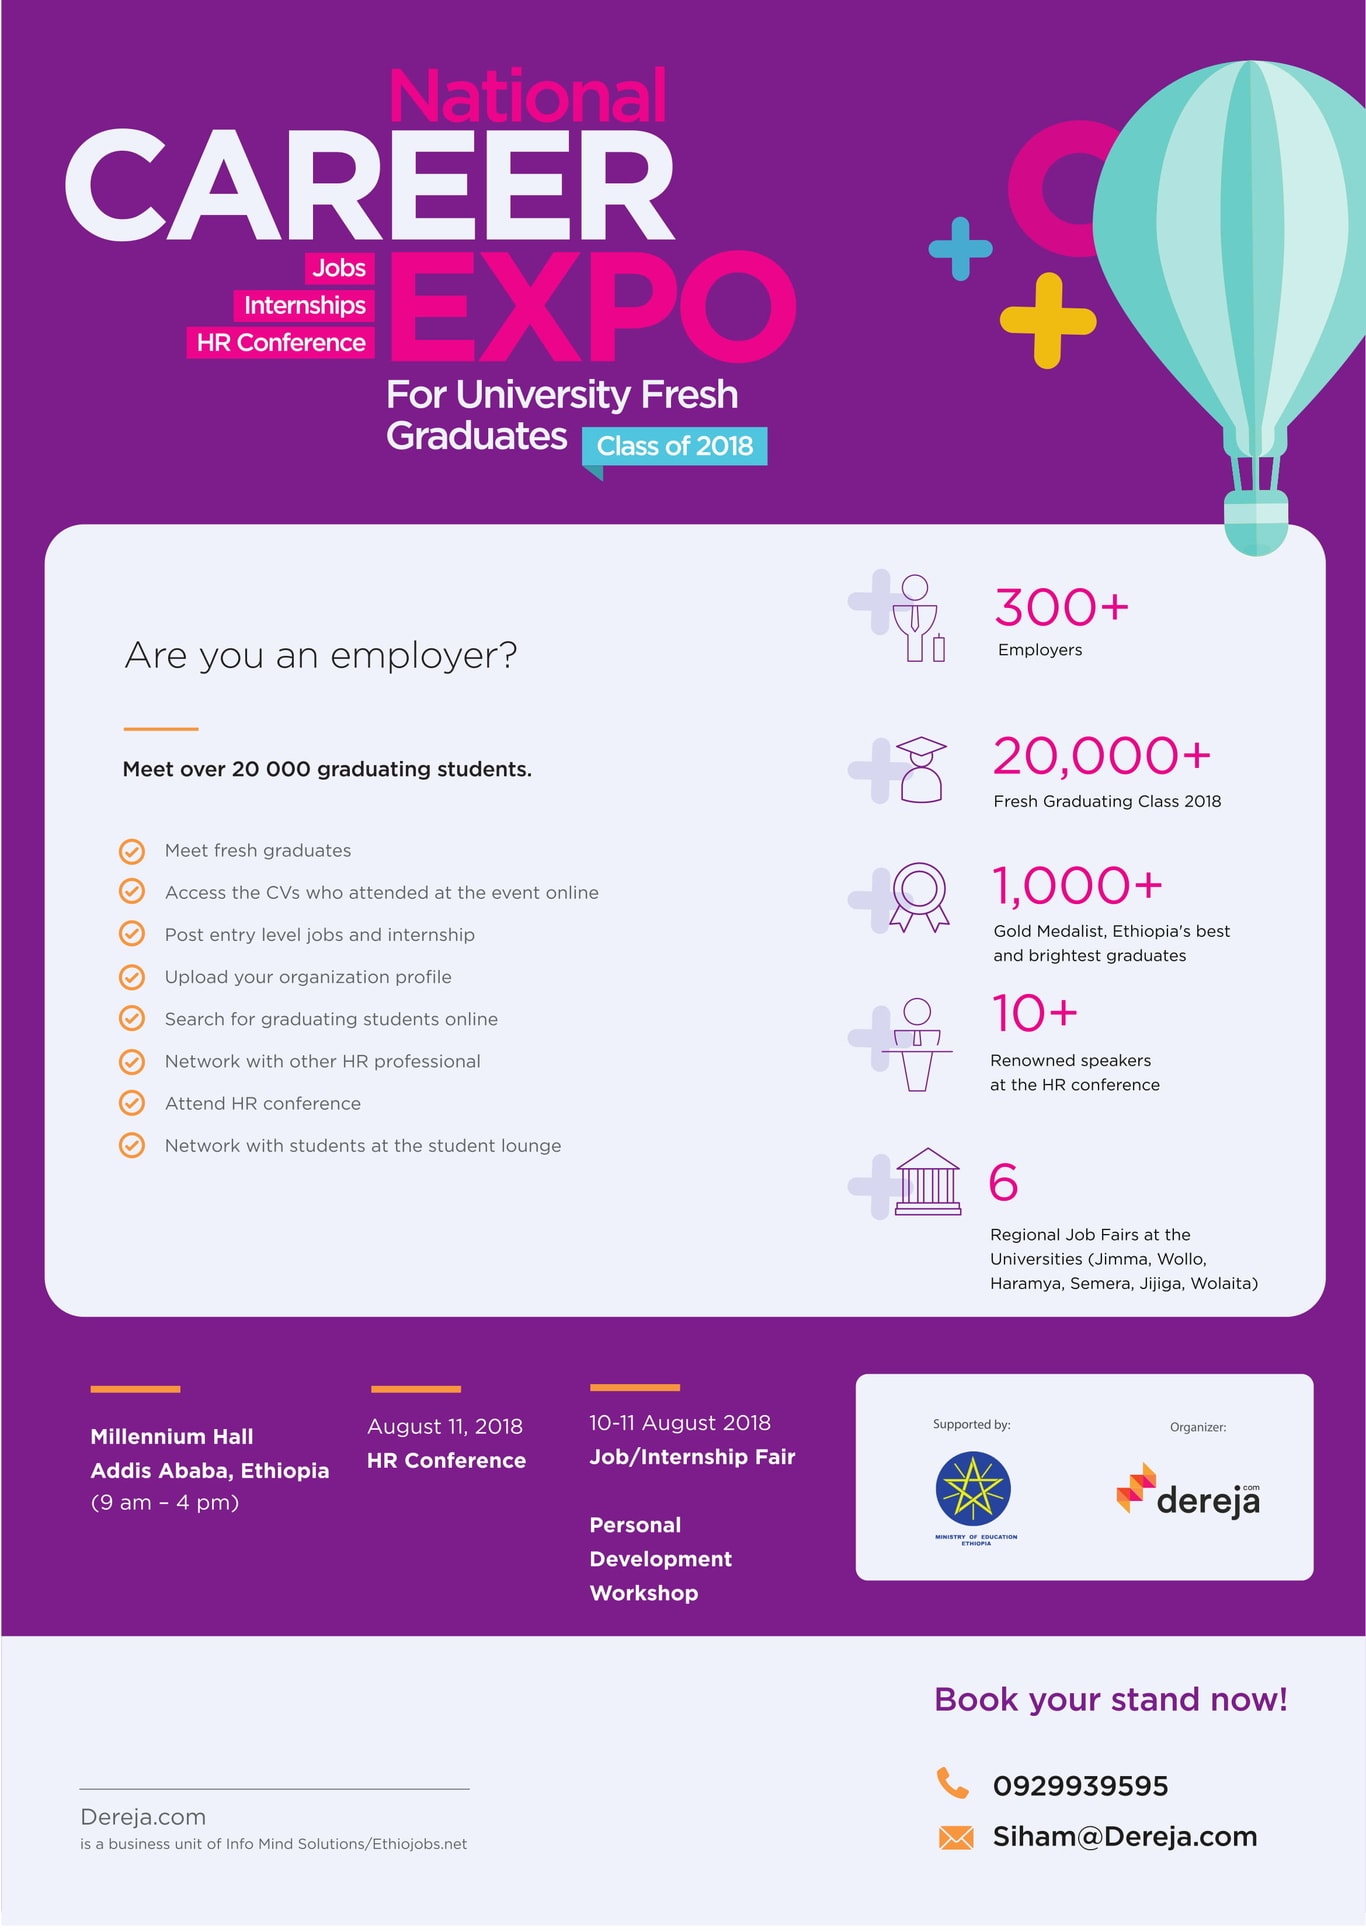 National Career Expo 2018 Employers